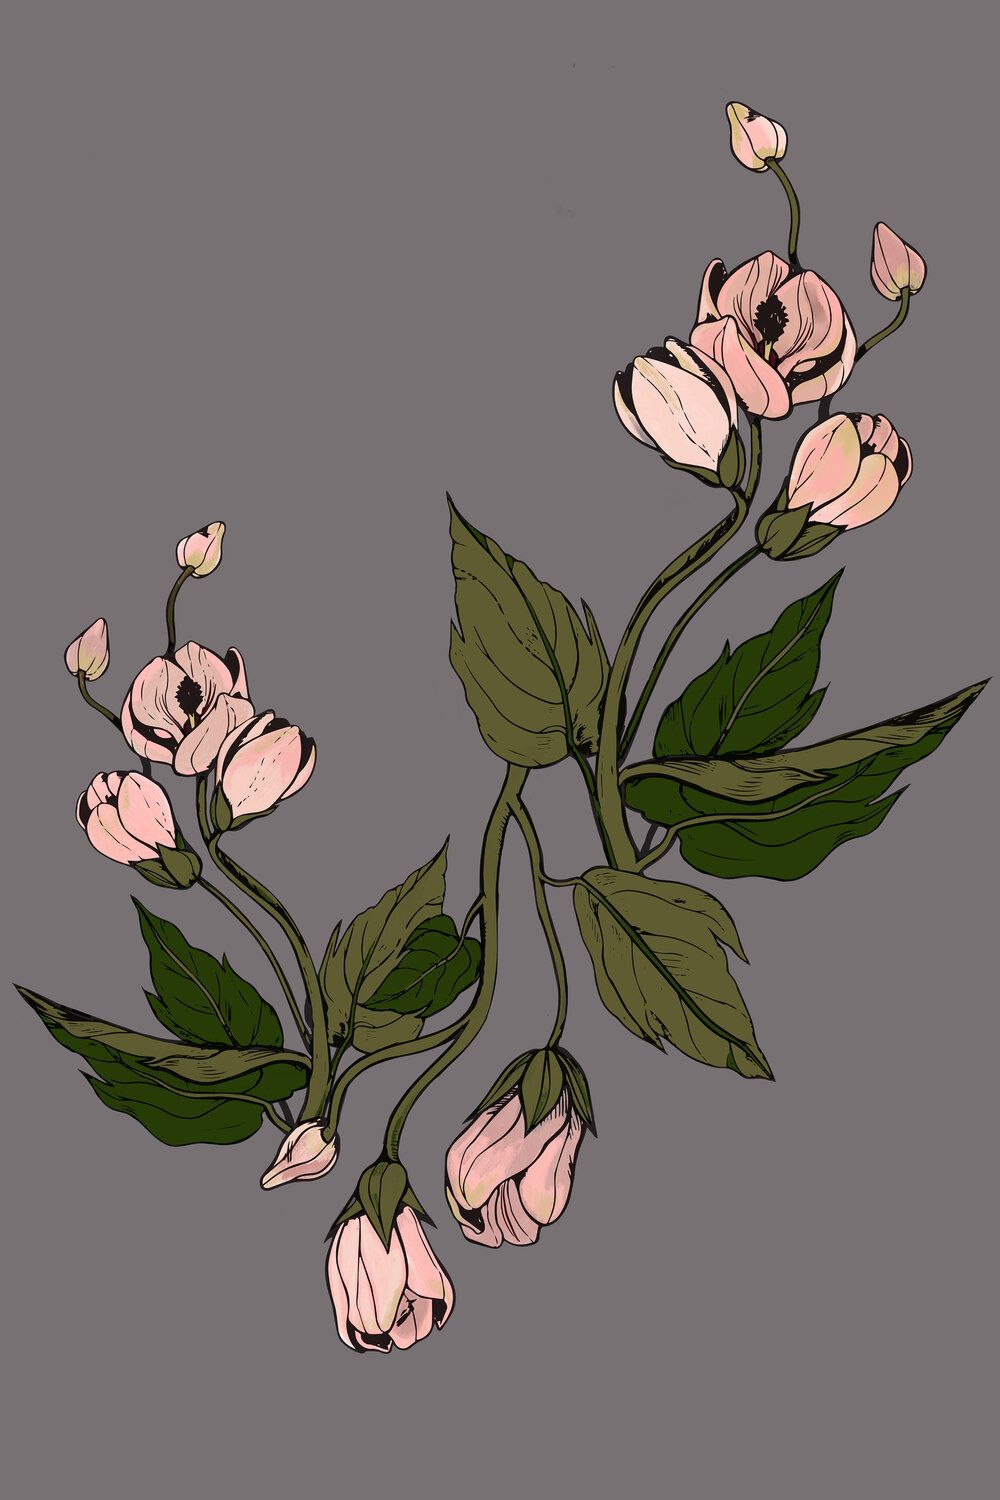 A delicate floral design in soft pink and green on a grey background. - Hand drawn